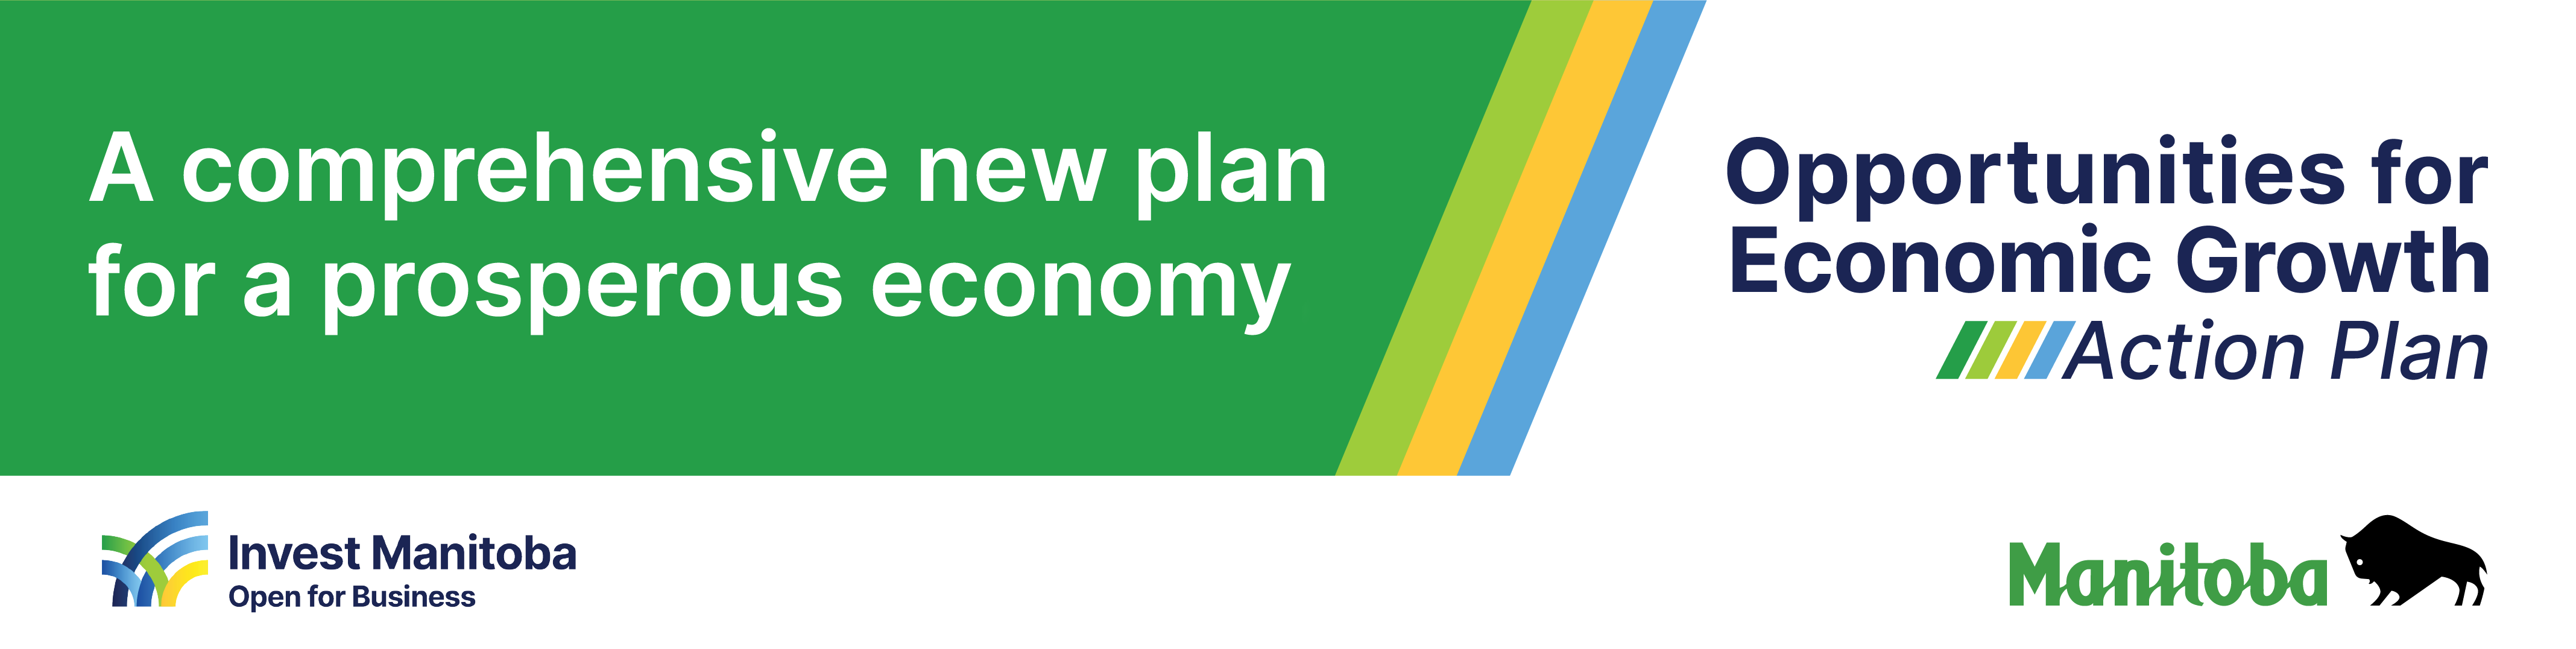 Opportunities for Economic Growth Action Plan